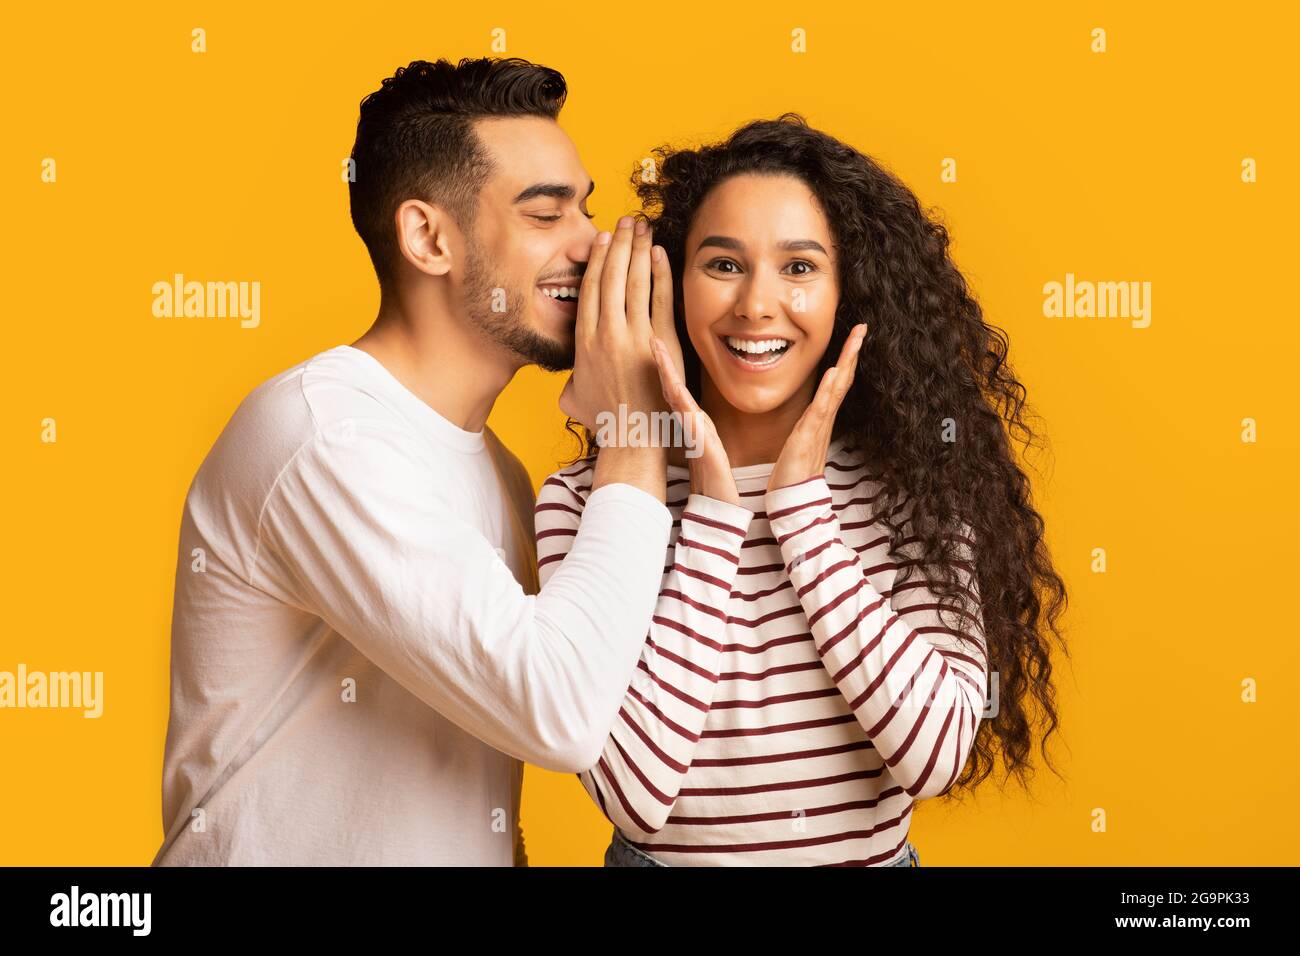 Big Secret. Young Arab Man Sharing News With His Excited Girlfriend Stock Photo